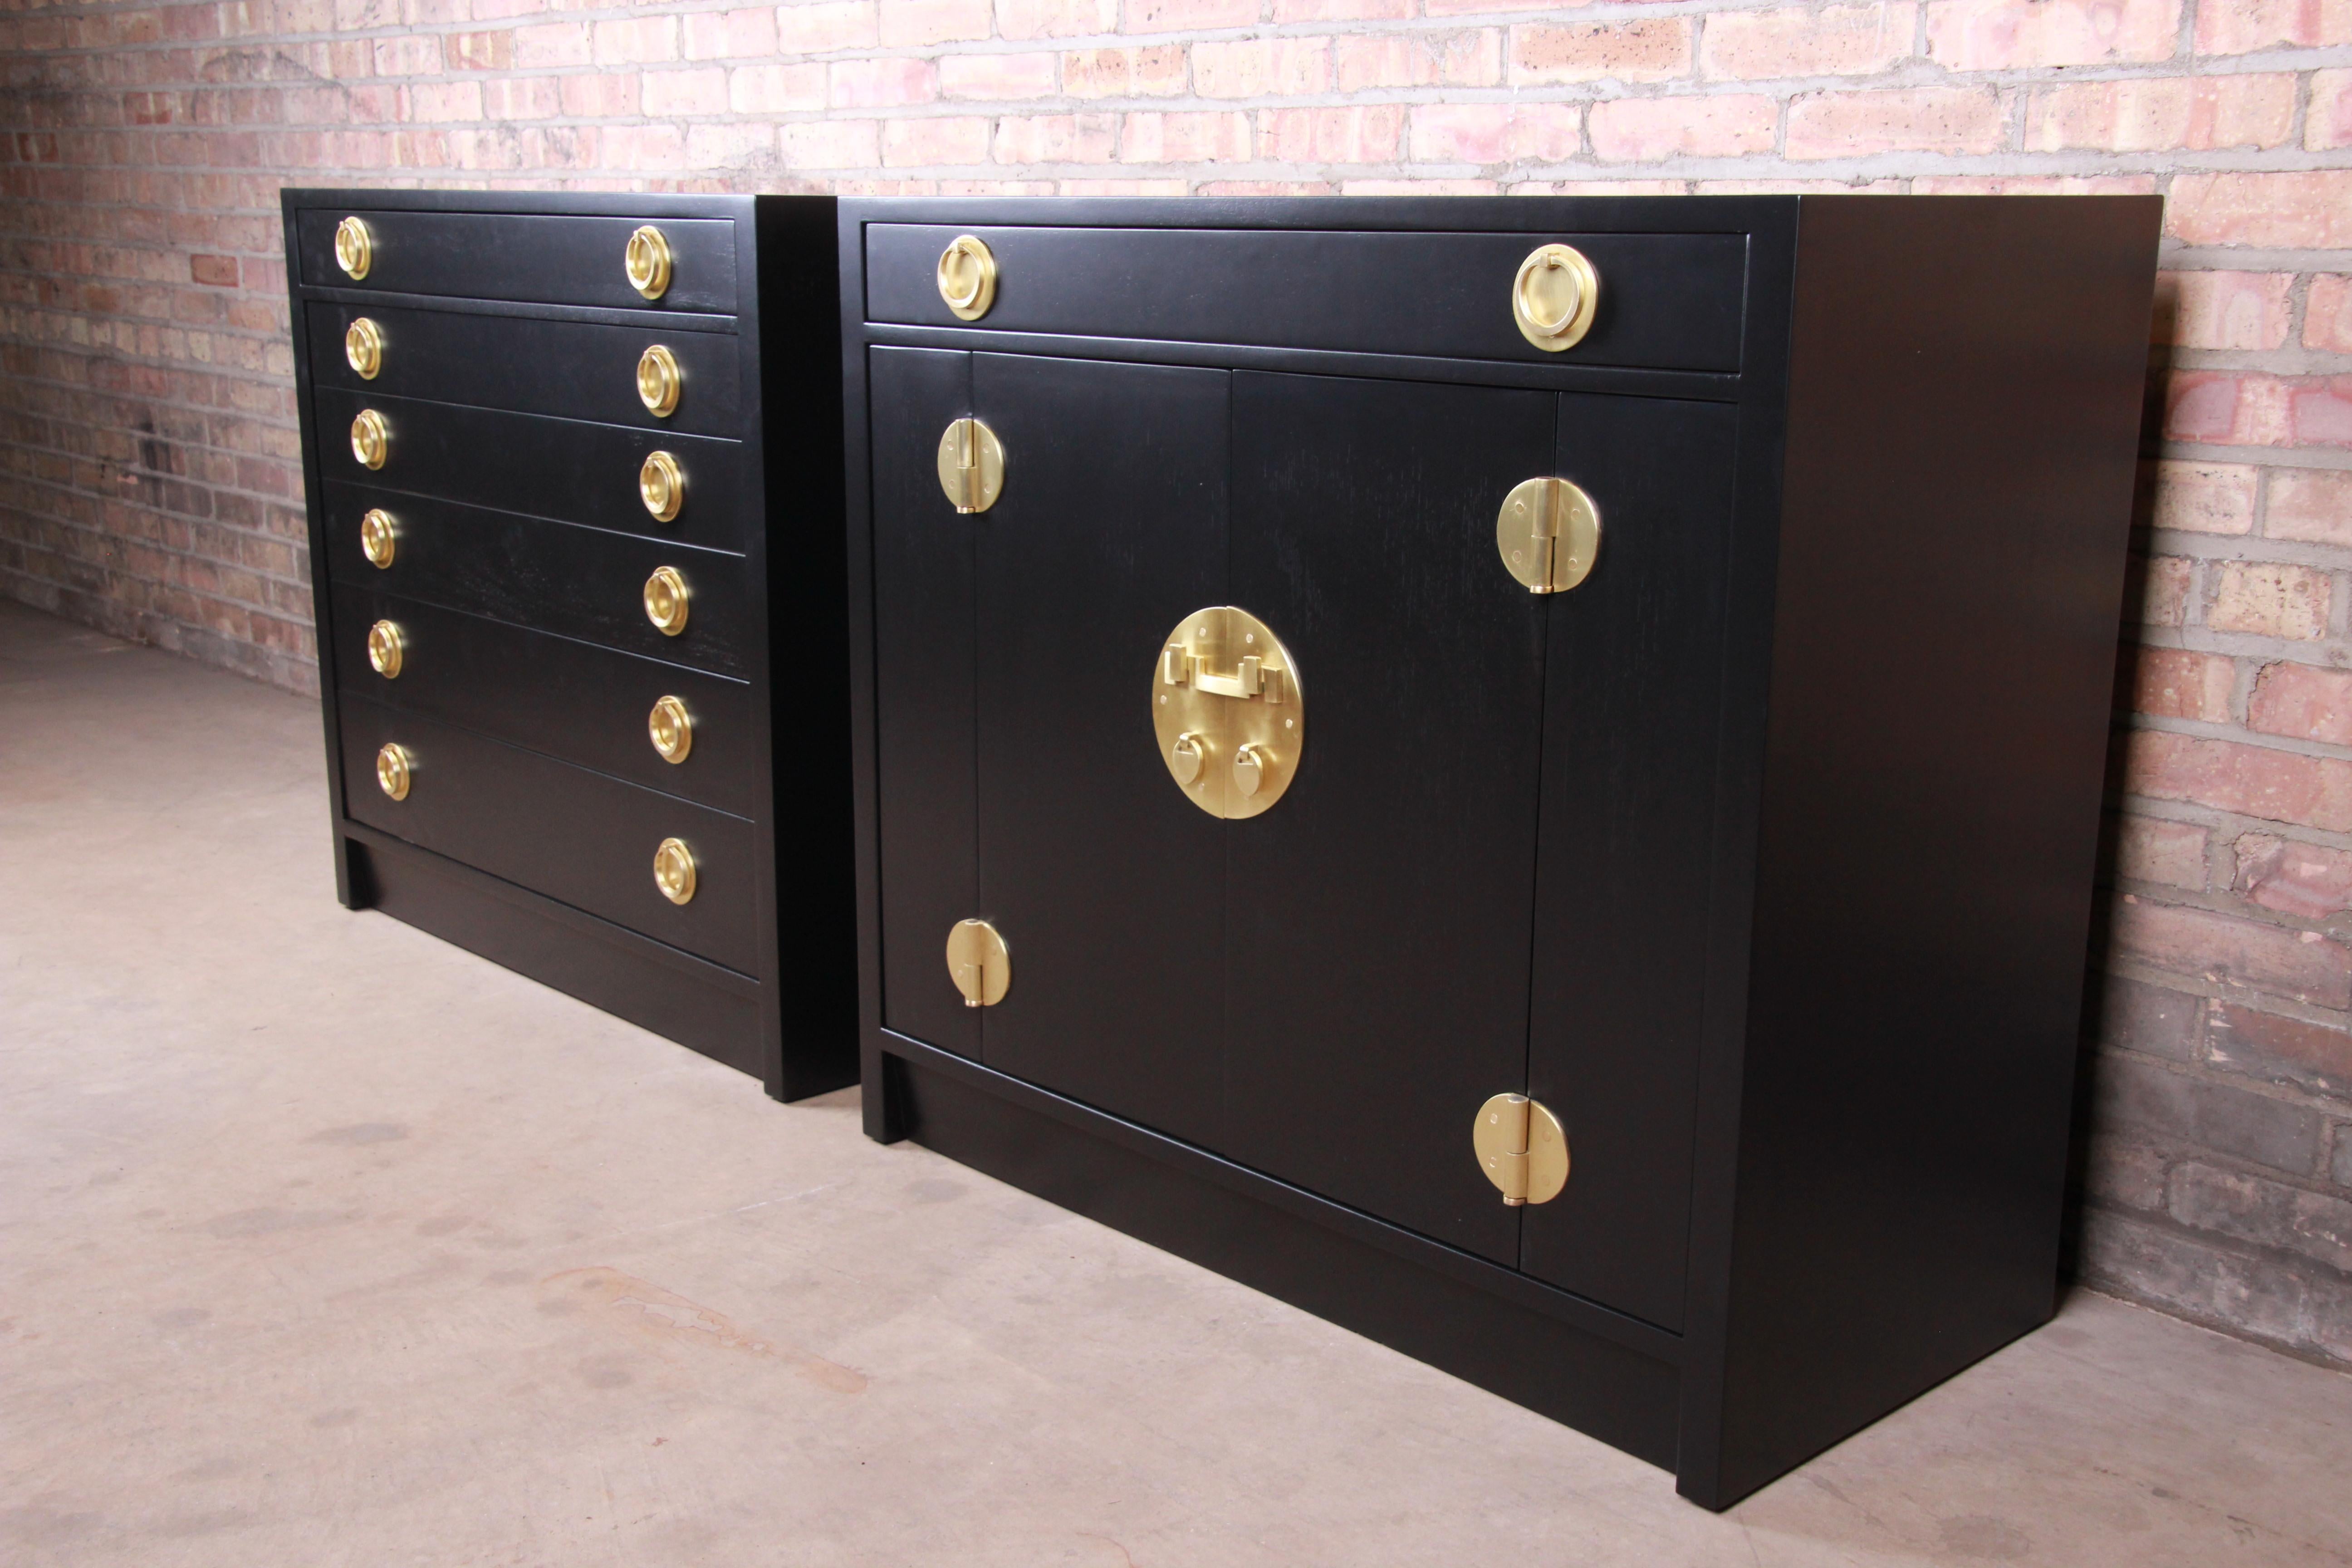 An exceptional pair of Mid-Century Modern Hollywood Regency chinoiserie chests

By Edward Wormley for Dunbar Furniture 